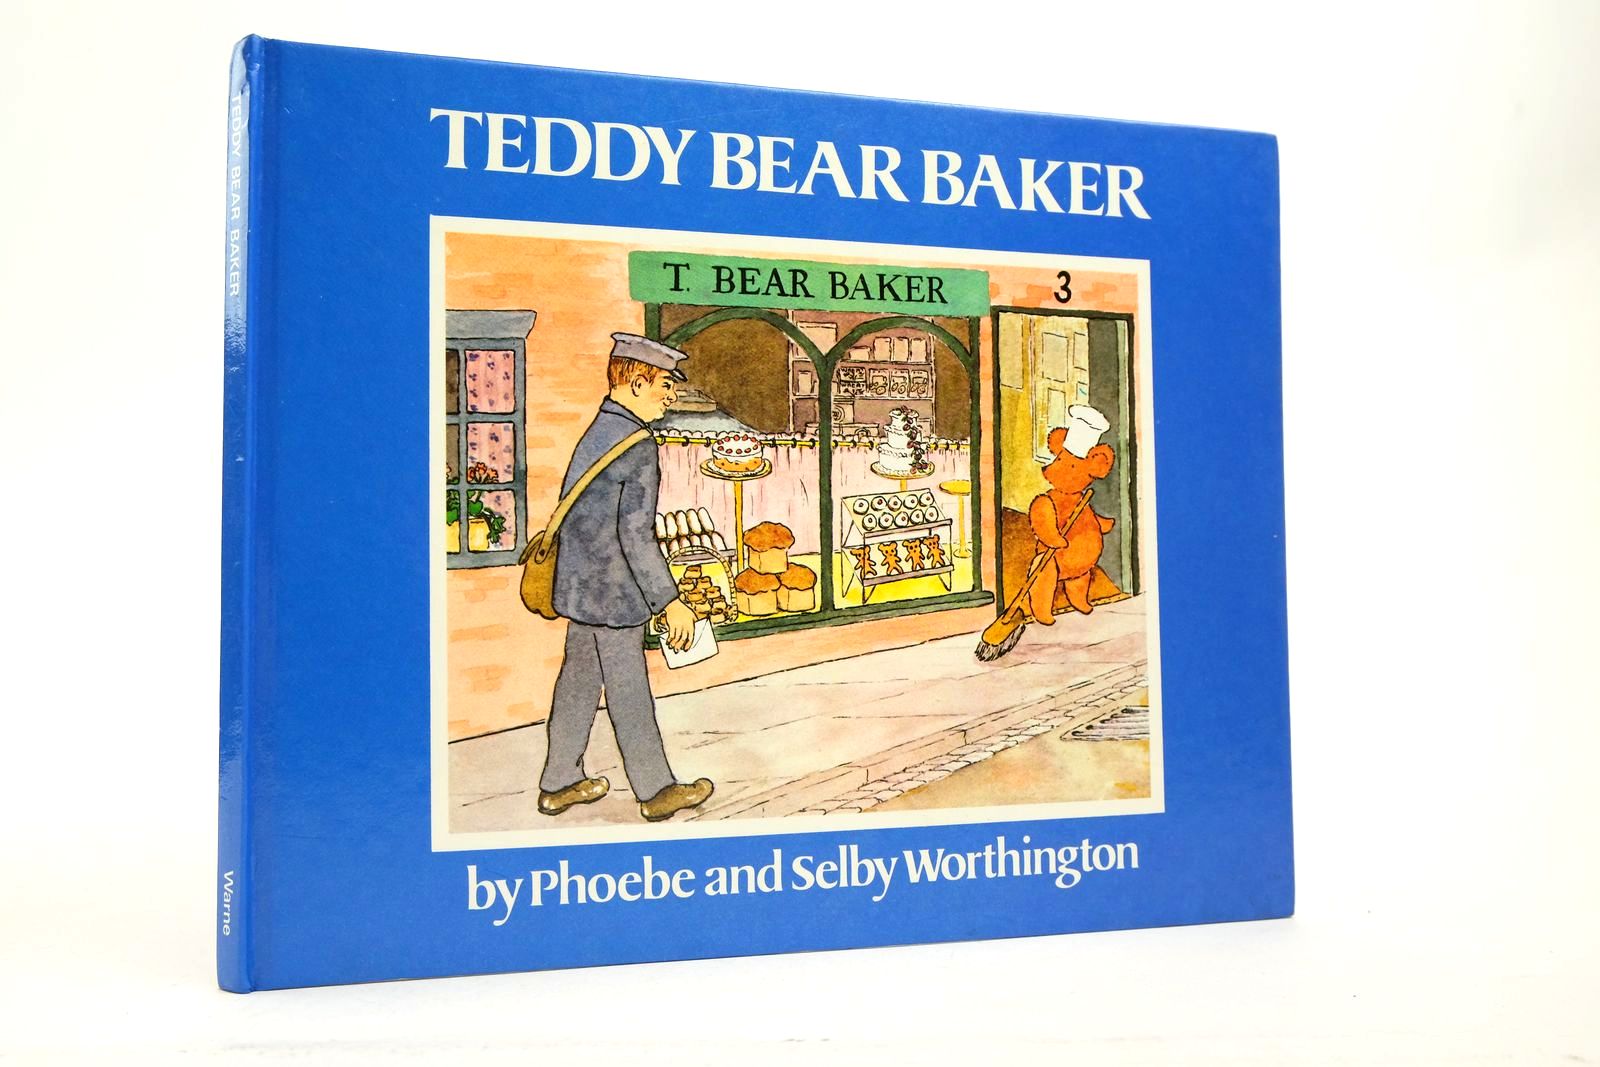 Photo of TEDDY BEAR BAKER written by Worthington, Phoebe
Worthington, Selby published by Frederick Warne & Co Ltd. (STOCK CODE: 2140511)  for sale by Stella & Rose's Books